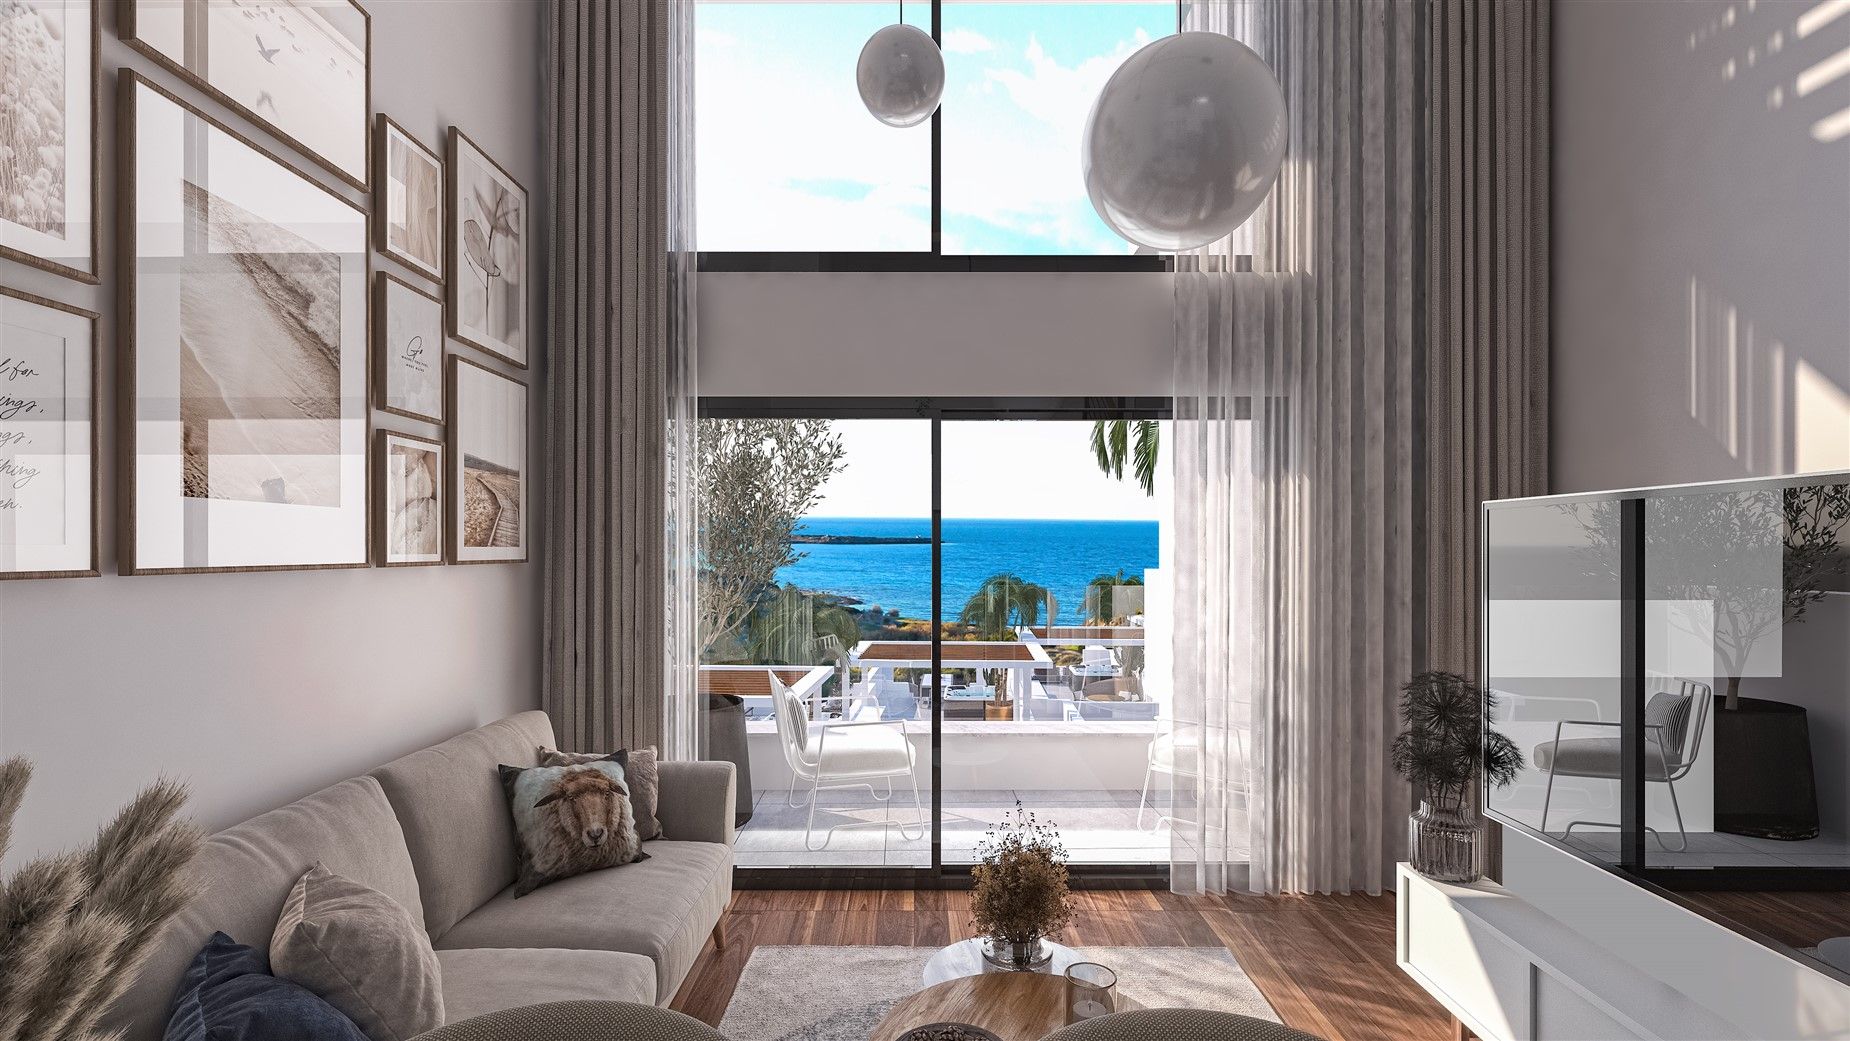 New duplex apartments by the sea in North Cyprus